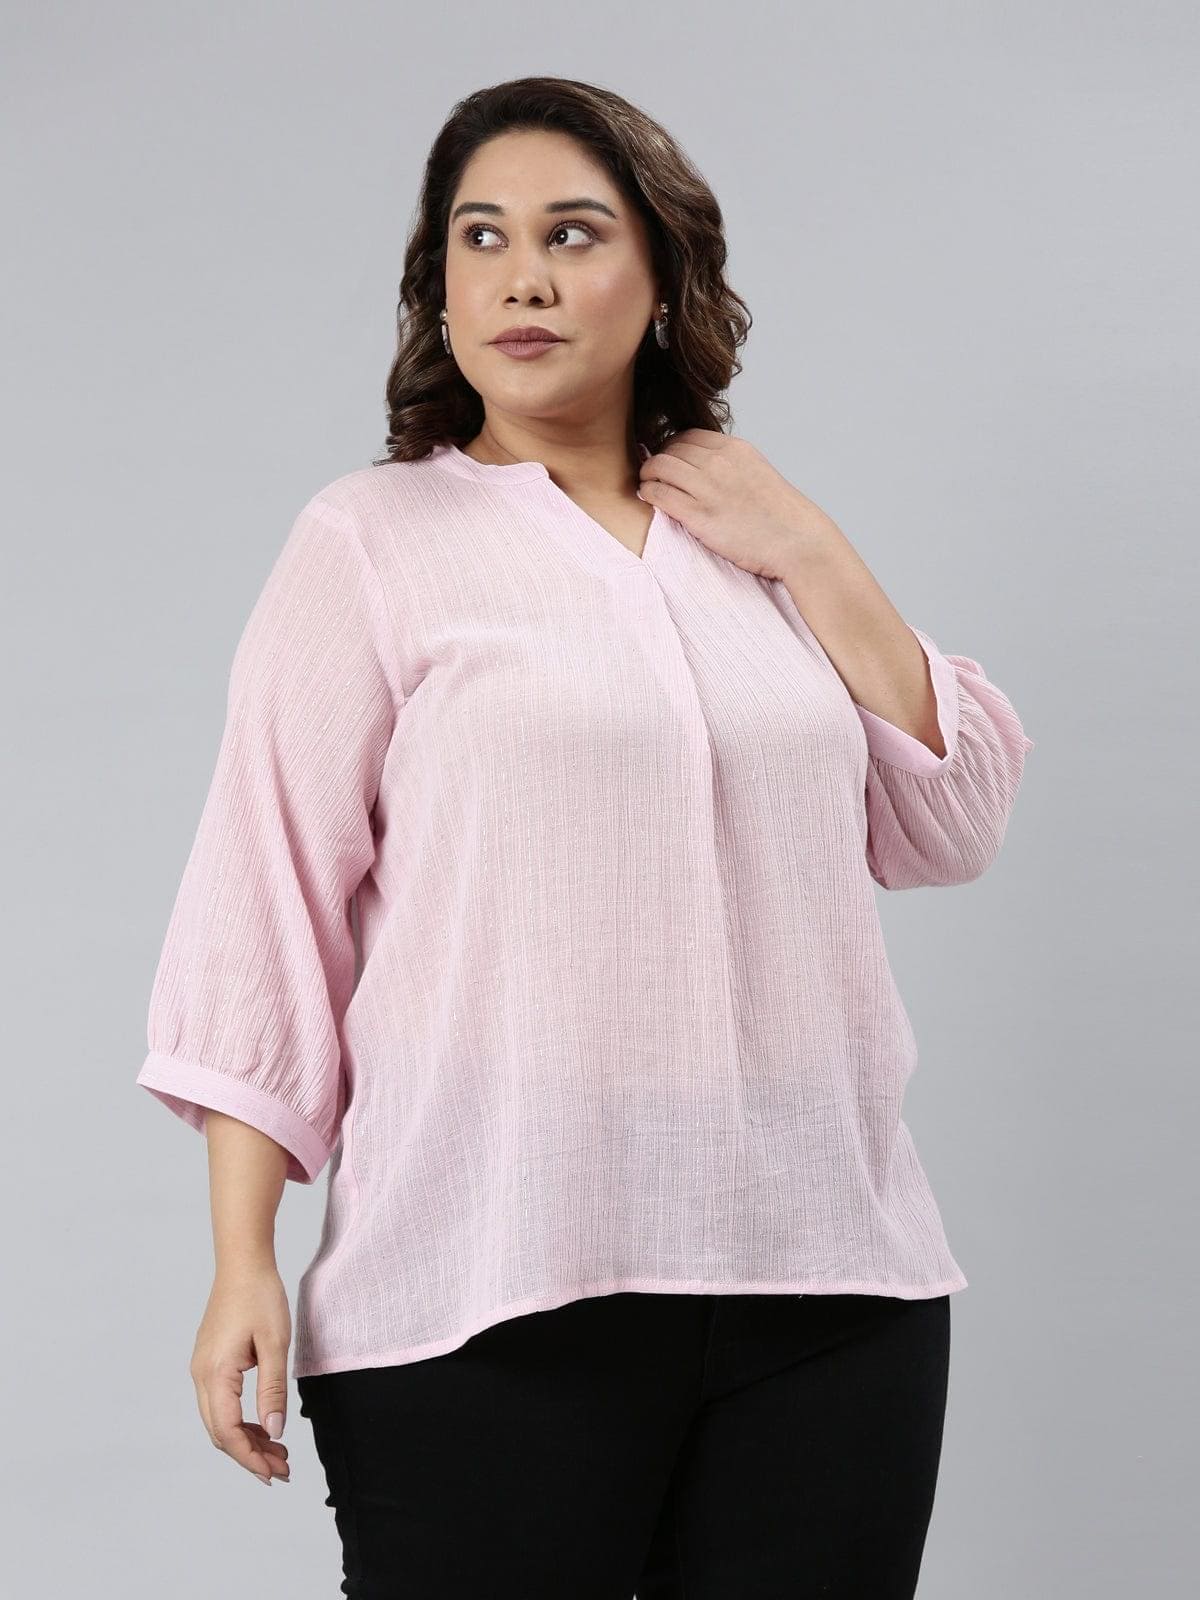 buy TheShaili PINK TOP at best prices   India